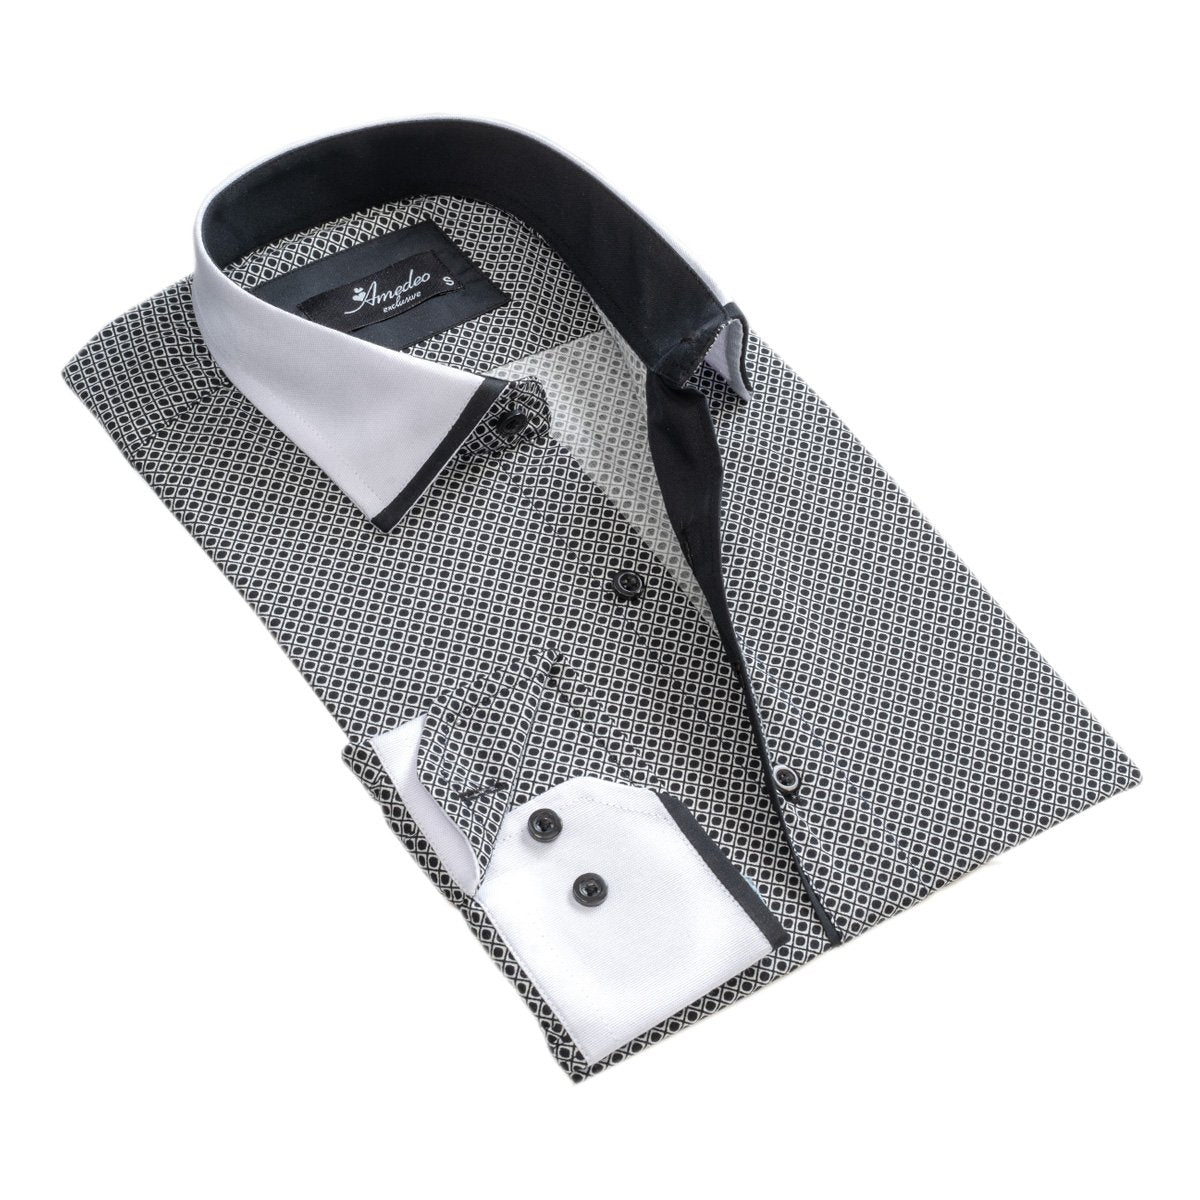 White Black Circles Mens Slim Fit Designer Dress Shirt - tailored Cotton Shirts for Work and Casual Wear - Amedeo Exclusive